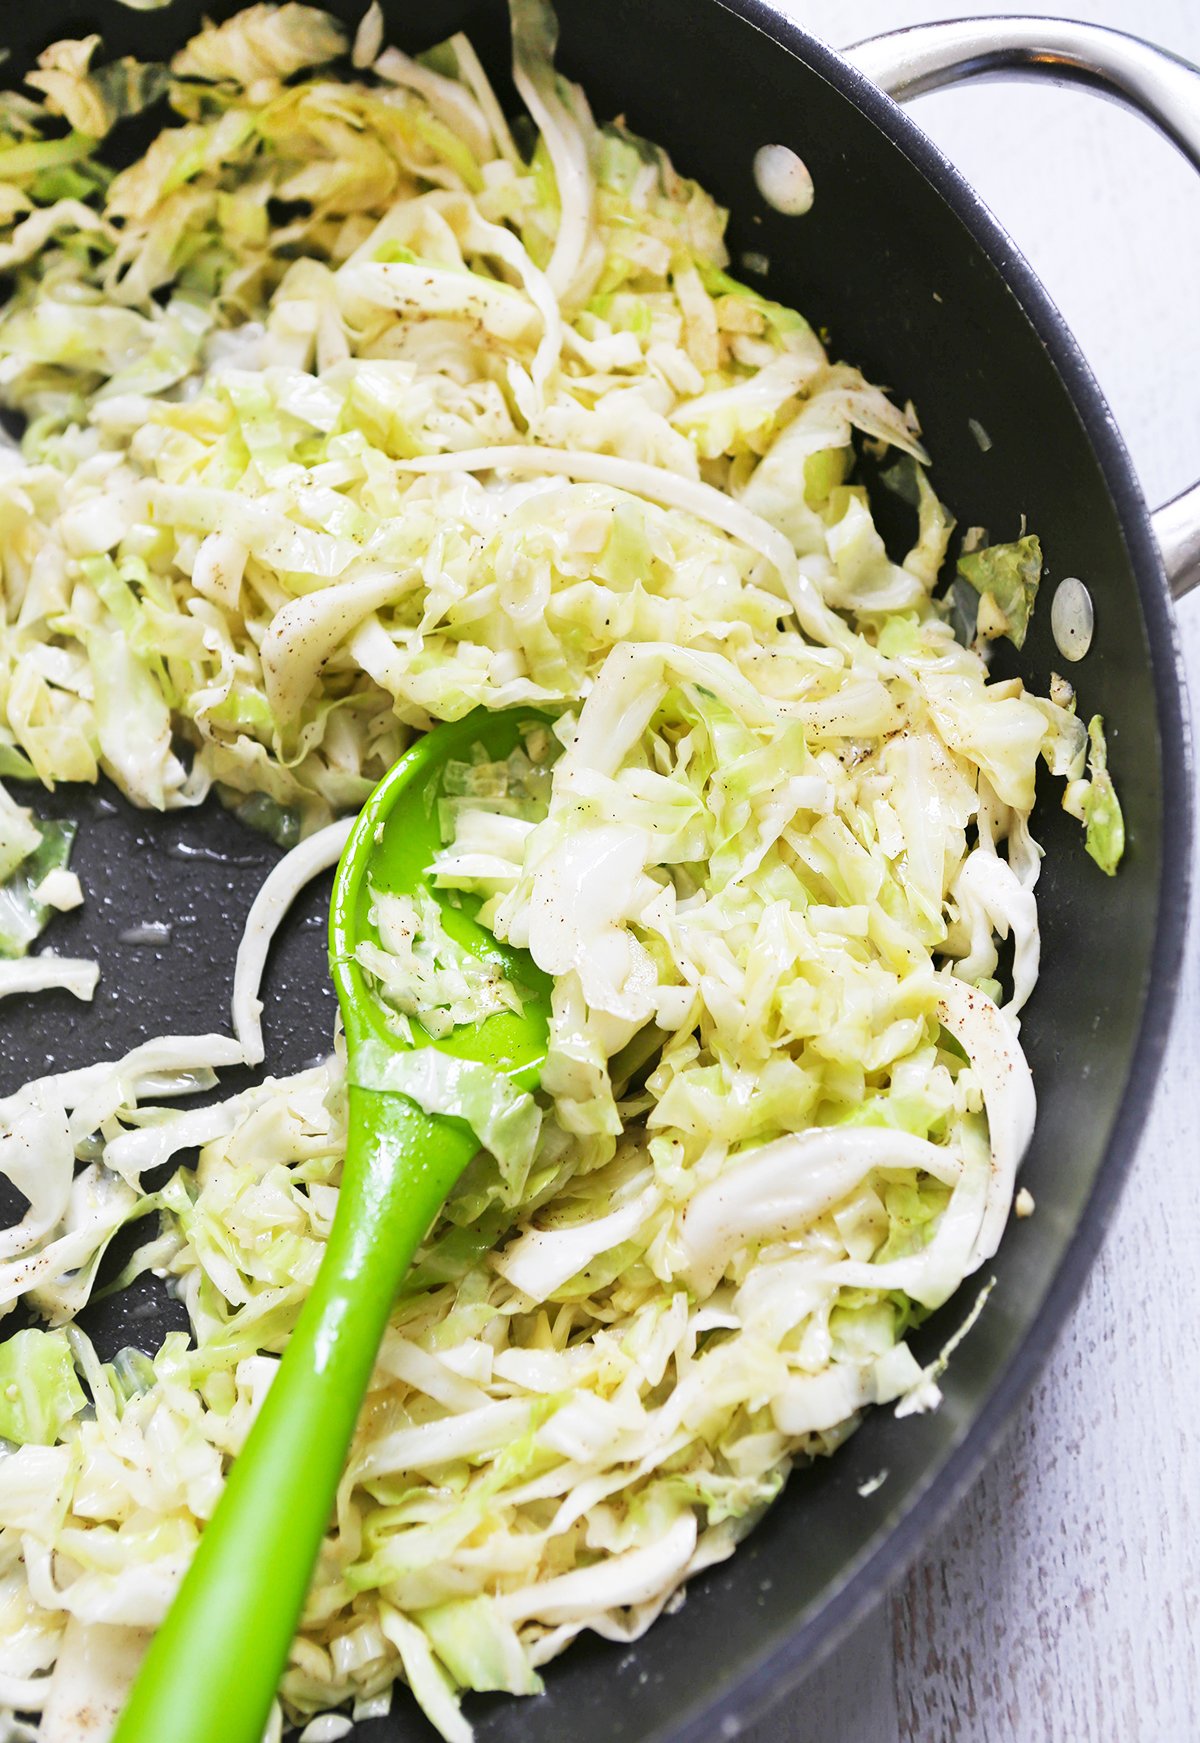 Top view of a pan of sauteed cabbage.